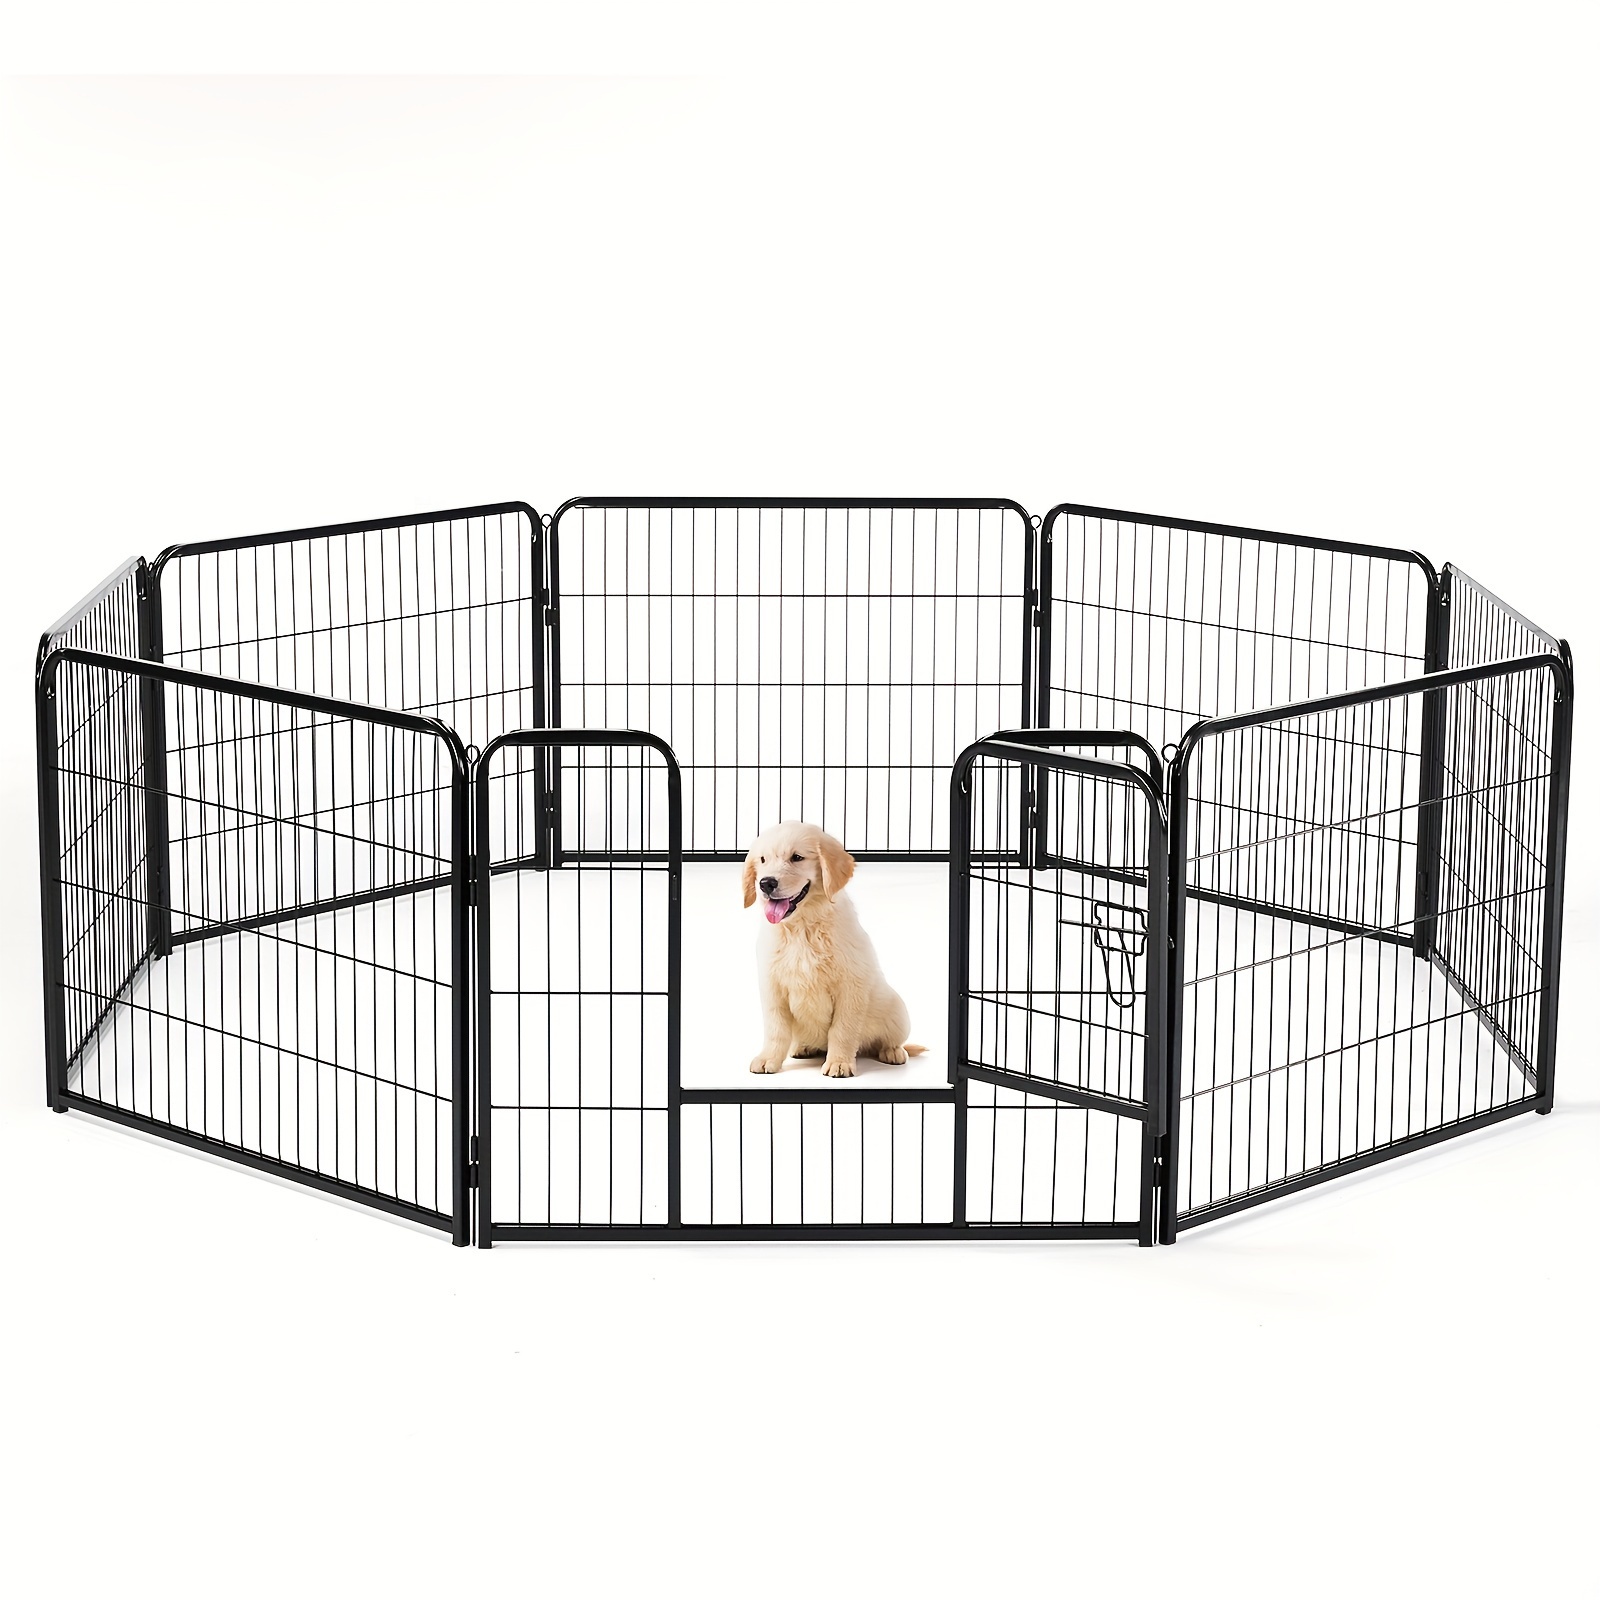 

Dog Playpen Indoor Pet Fence Outdoor 8 Panel Metal Exercise Puppy Pen With Door For Large/medium/small Dogs Portable For Garden, Yard